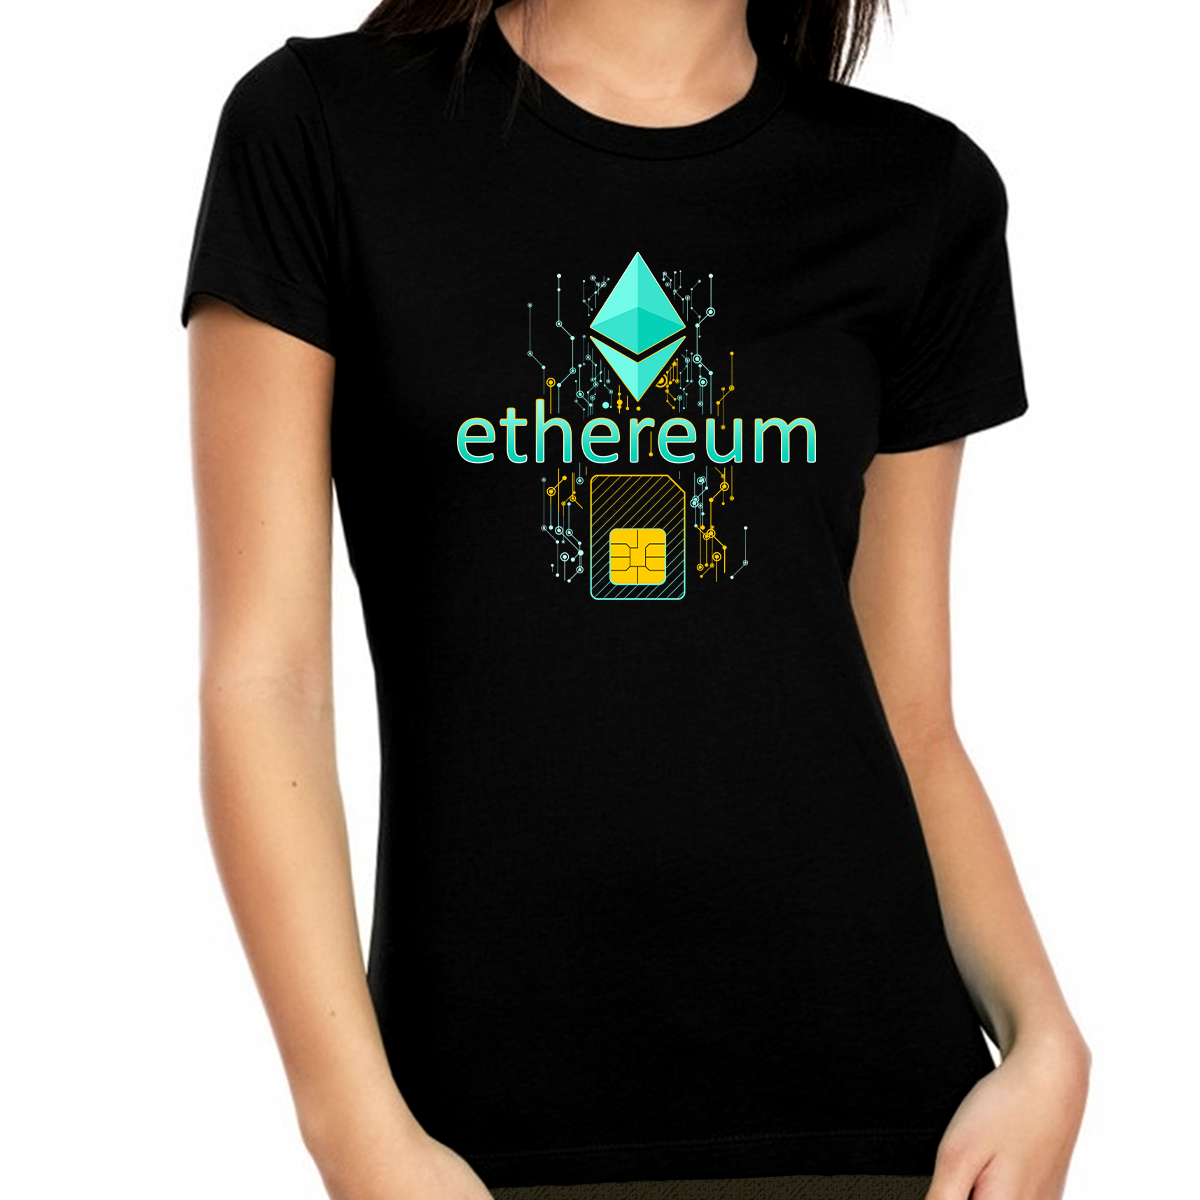 Ethereum Shirts for Women Crypto Gifts Ethereum Crypto Currency Ethereum Shirt ETH Digital Ethereum Shirt